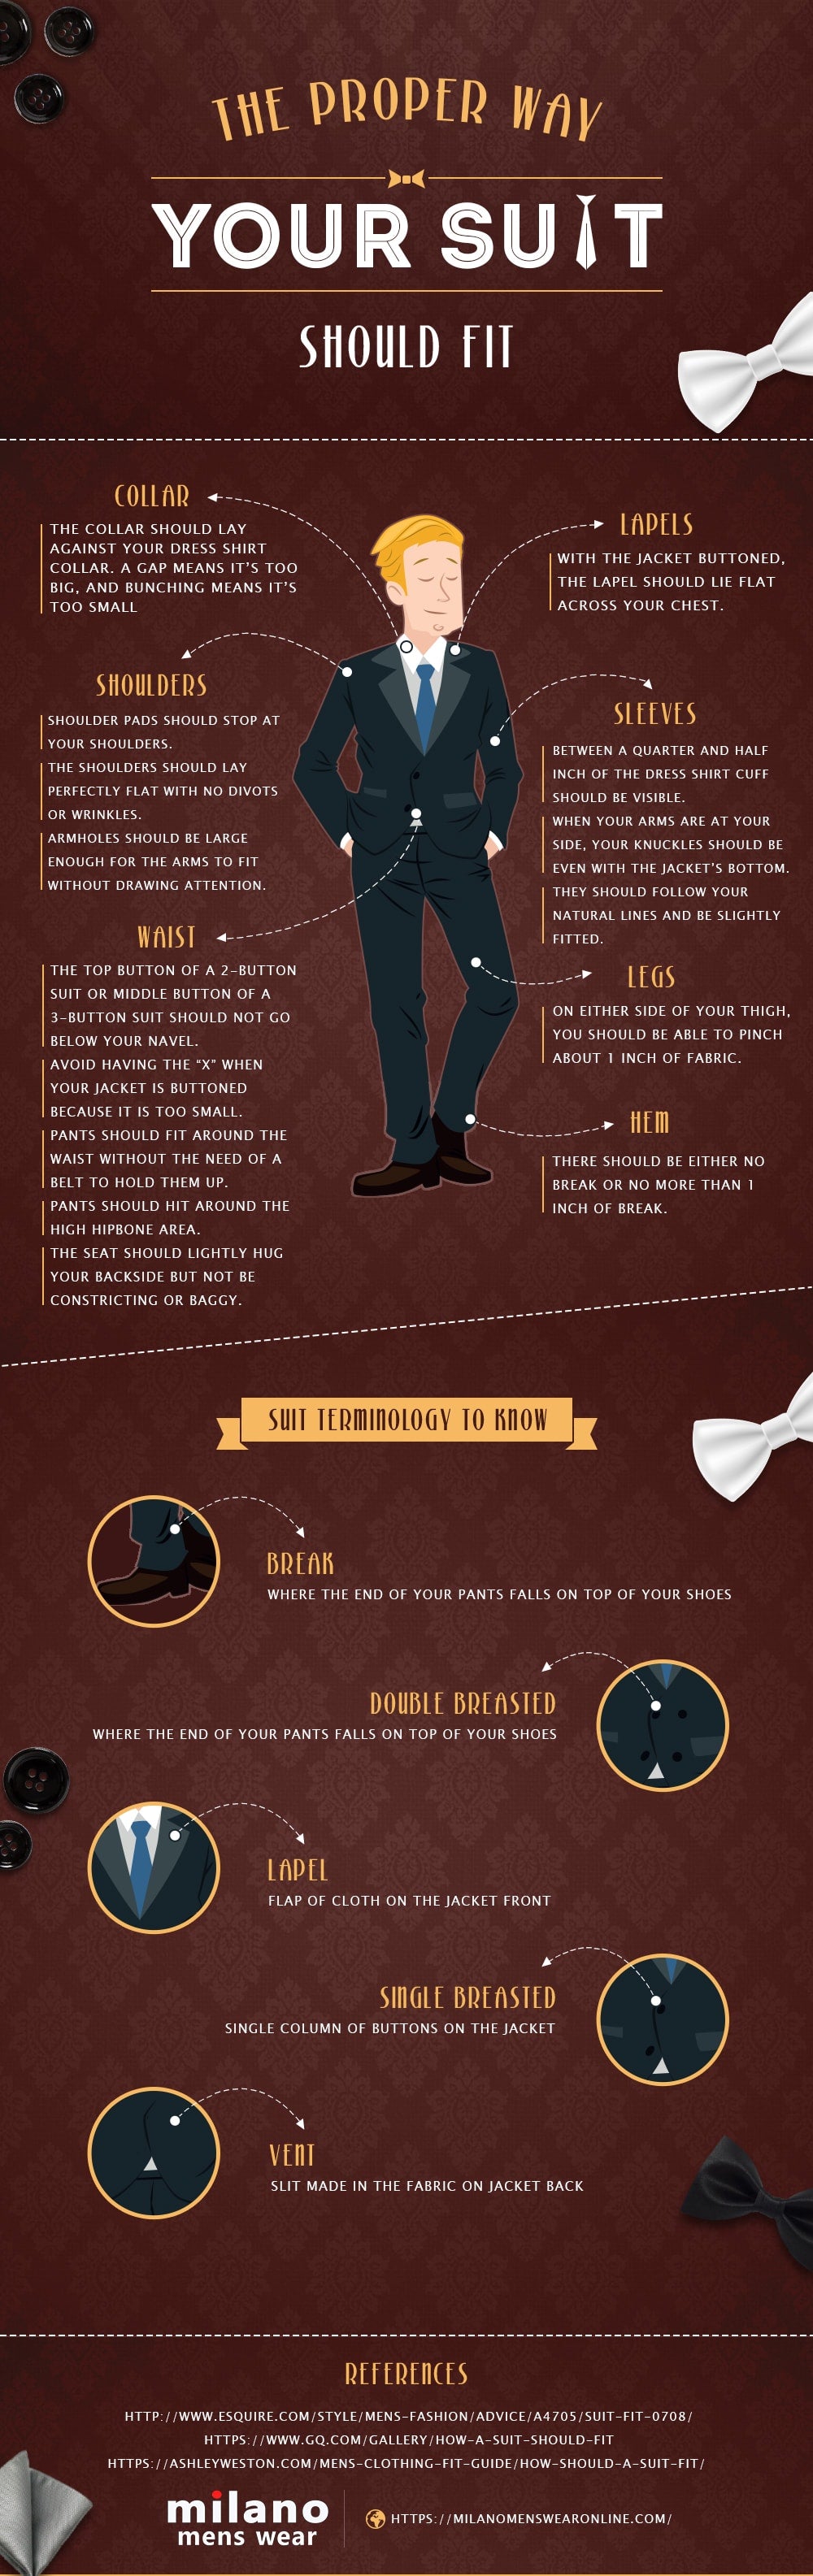 Perfect Fitting Guide for your Suit [Infographic] - Andre Emilio